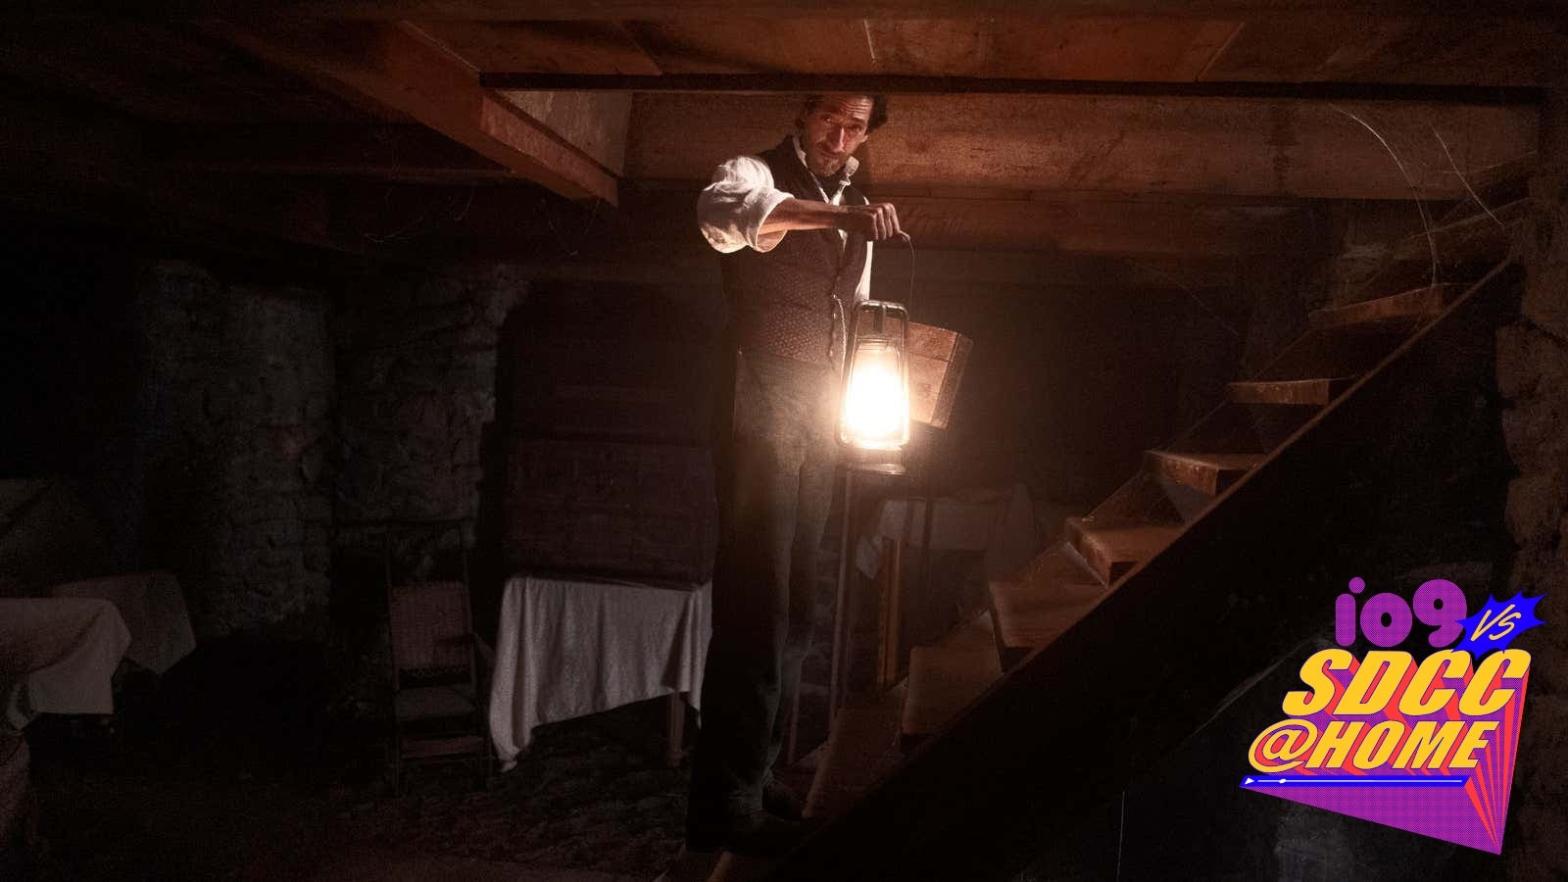 A lantern-toting Captain Charles Boone (Adrien Brody) is surrounded by darkness in Chapelwaite. (Image: Chris Reardon/Epix)